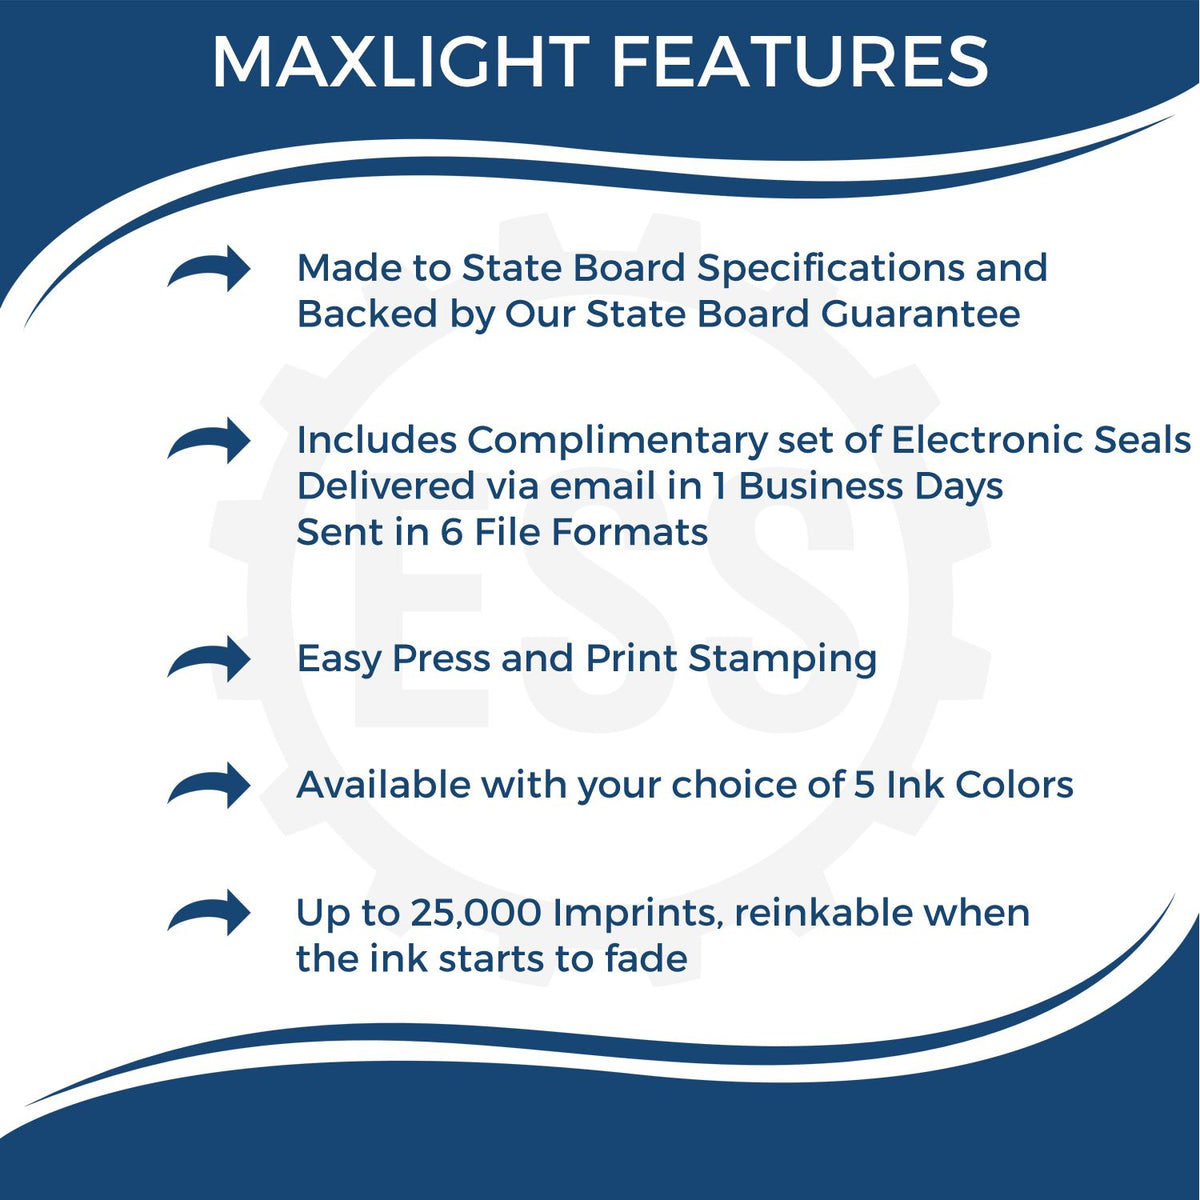 A picture of an infographic highlighting the selling points for the Premium MaxLight Pre-Inked New York Landscape Architectural Stamp